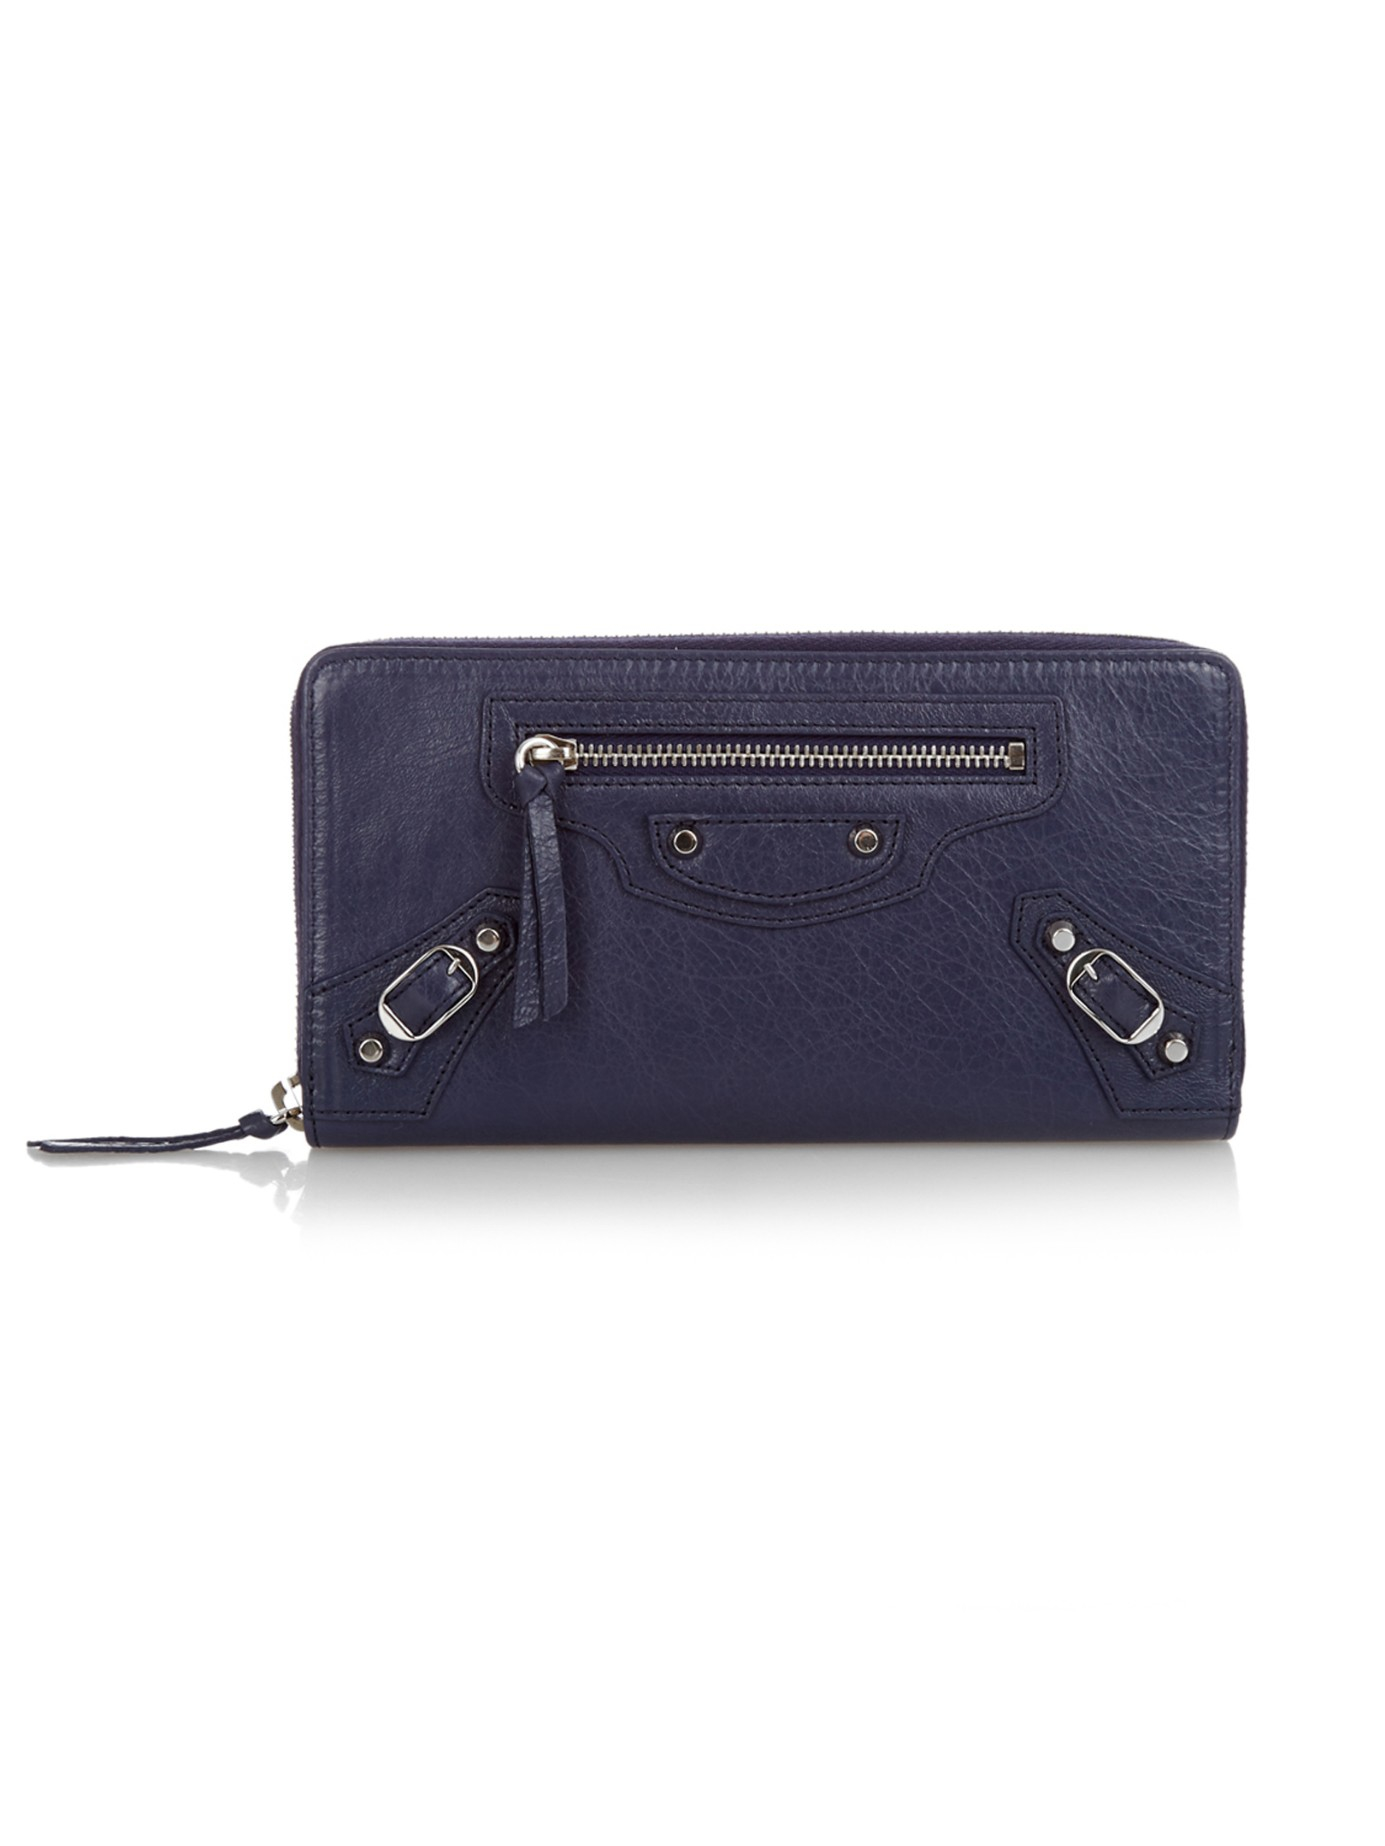 Balenciaga Classic Zip-around Leather Wallet in Navy (Blue) | Lyst